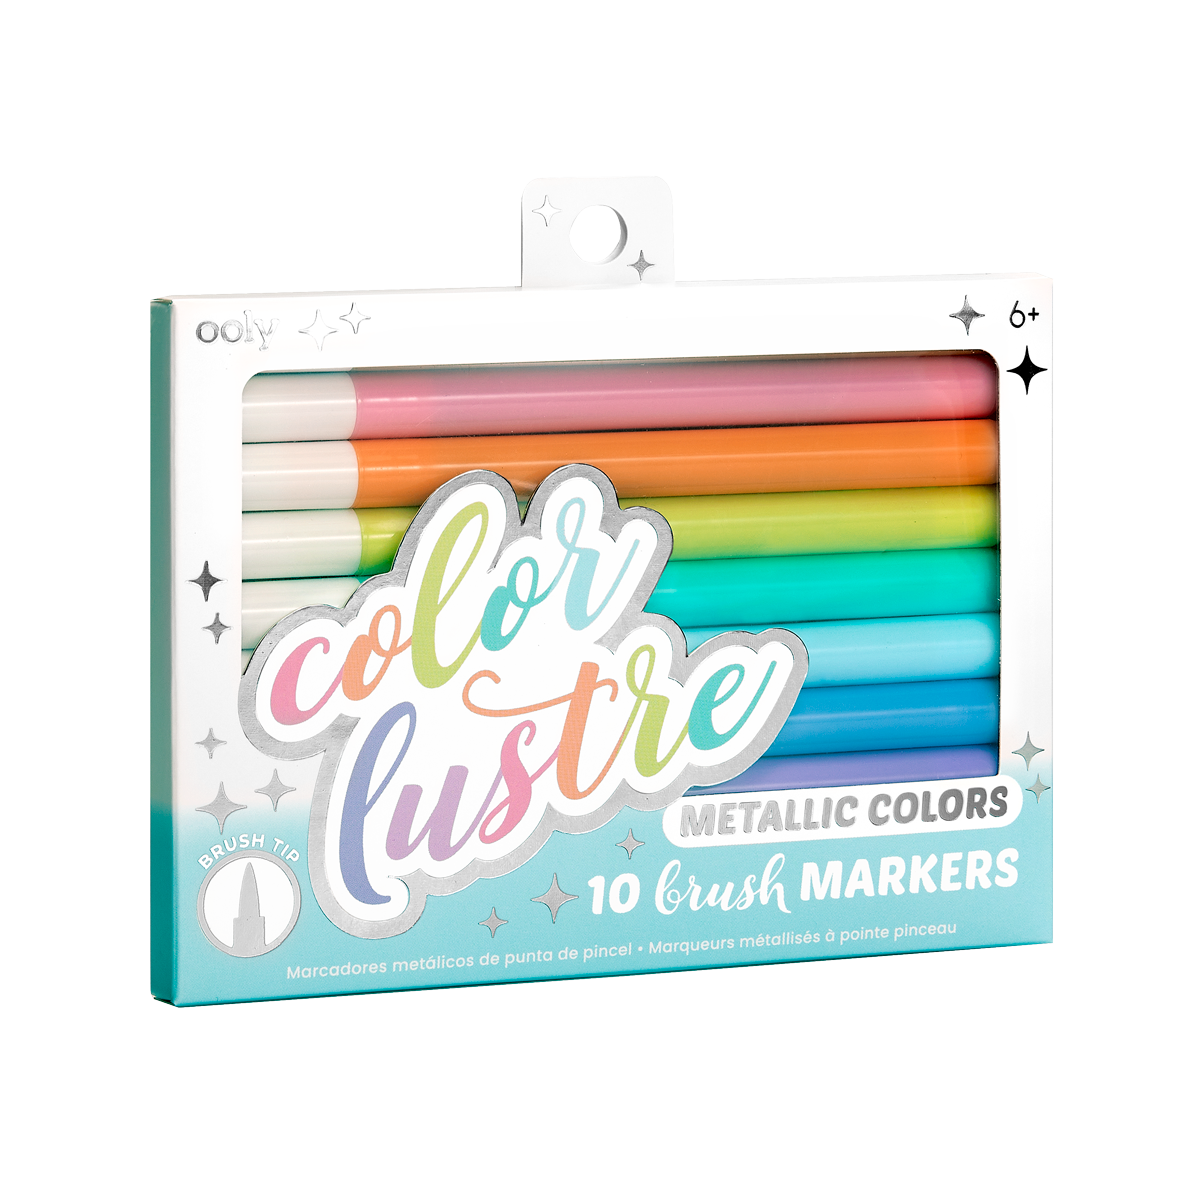 Image of OOLY Color Lustre Metallic Brush Markers in new package